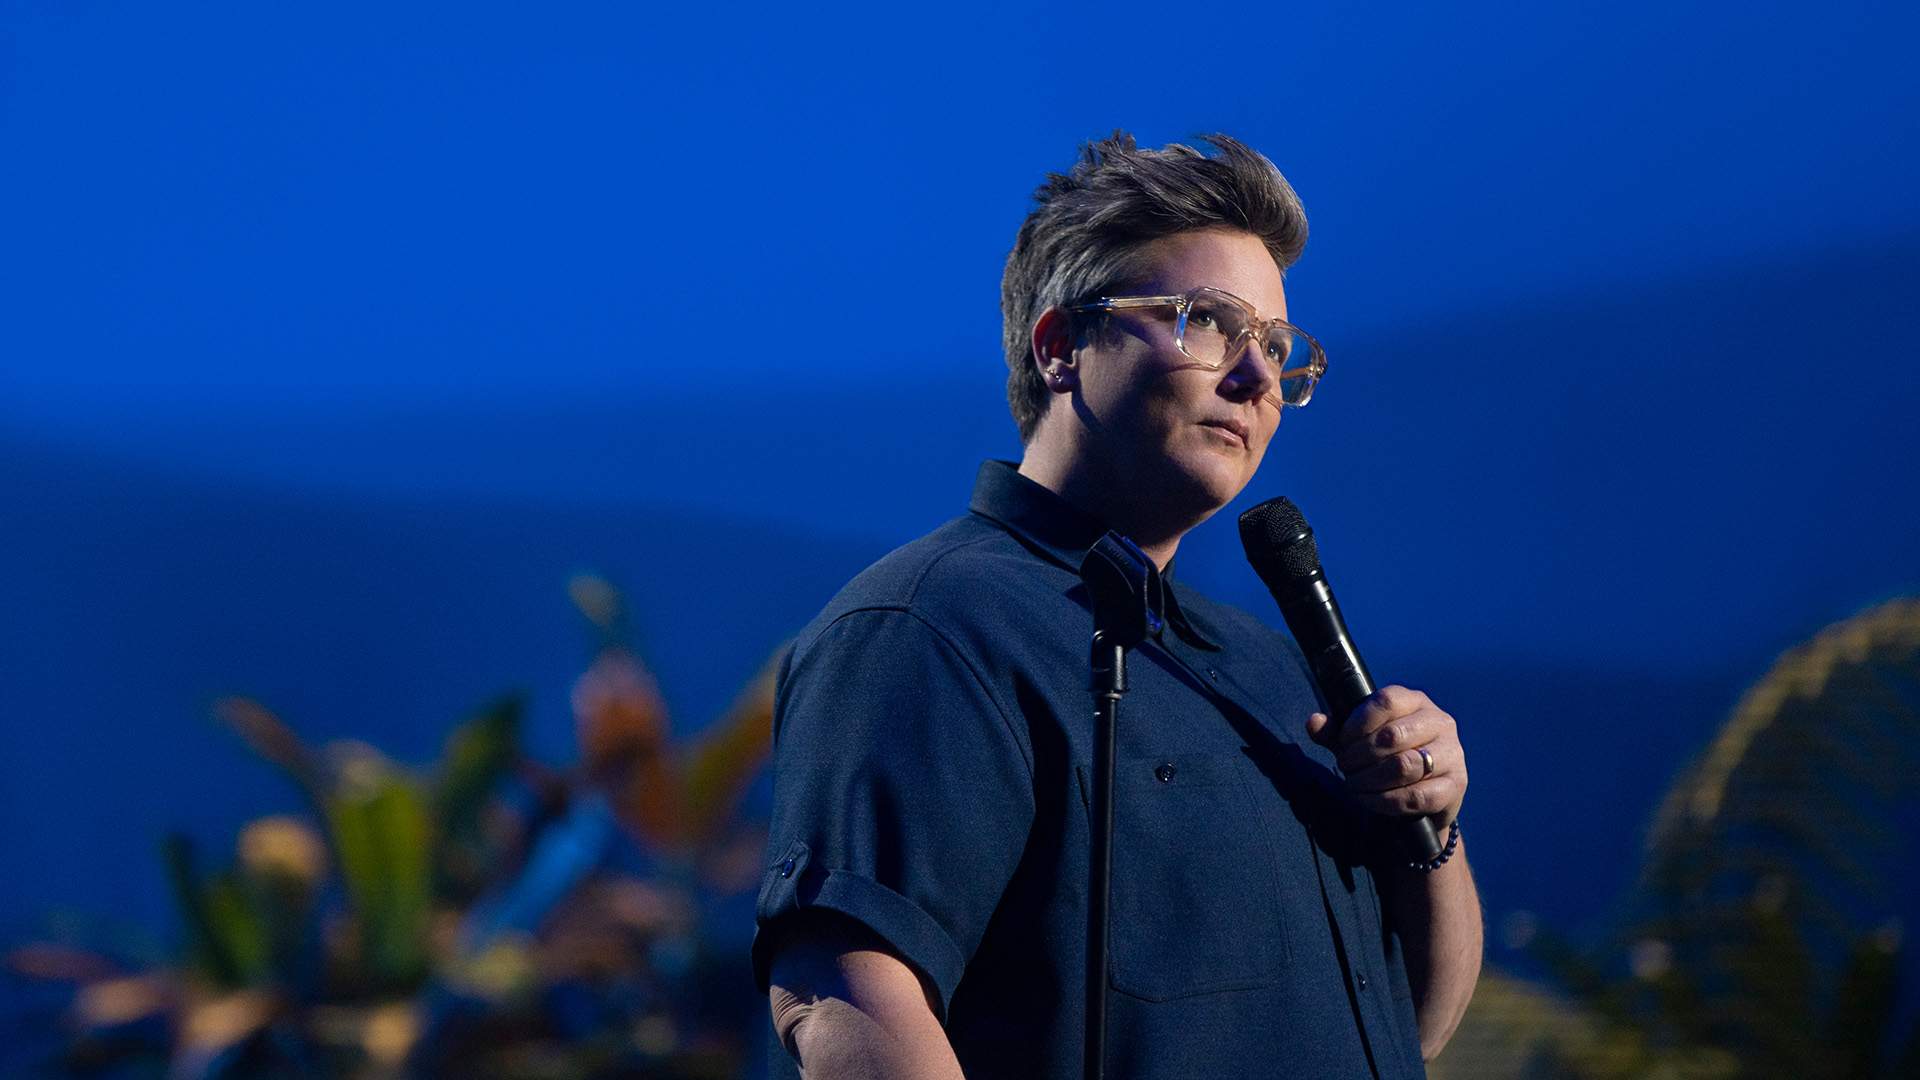 Hannah Gadsby's New Stand-Up Special 'Something Special' Will Hit Netflix in May